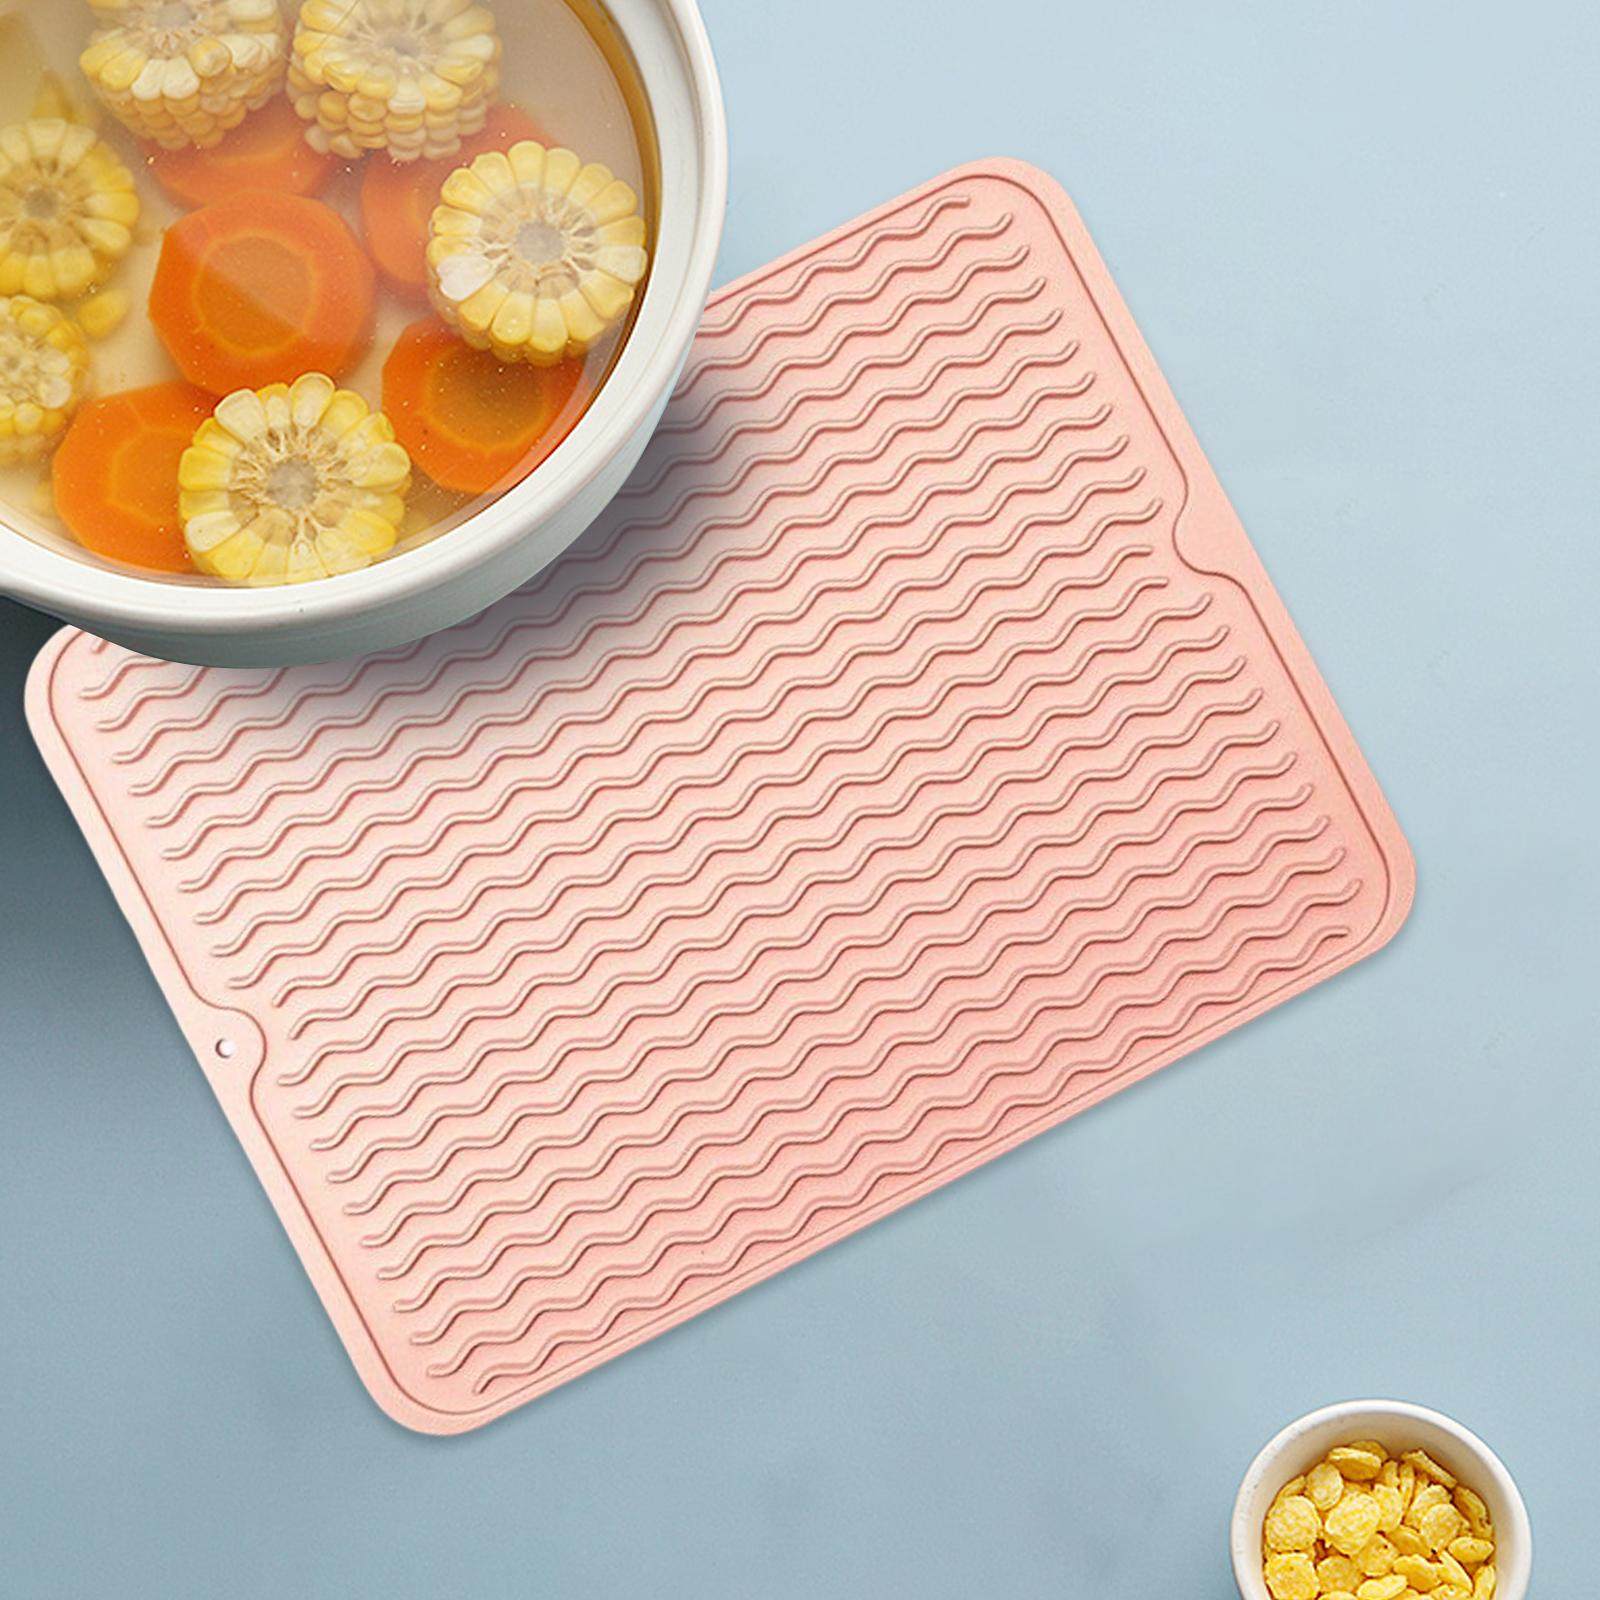 Kitchen Drying Mat, Dish Drainer Mat, Eco-friendly Silicone Drying Mat,  Heat Resistant, Non-slip And Dishwasher Safe 40x30cm